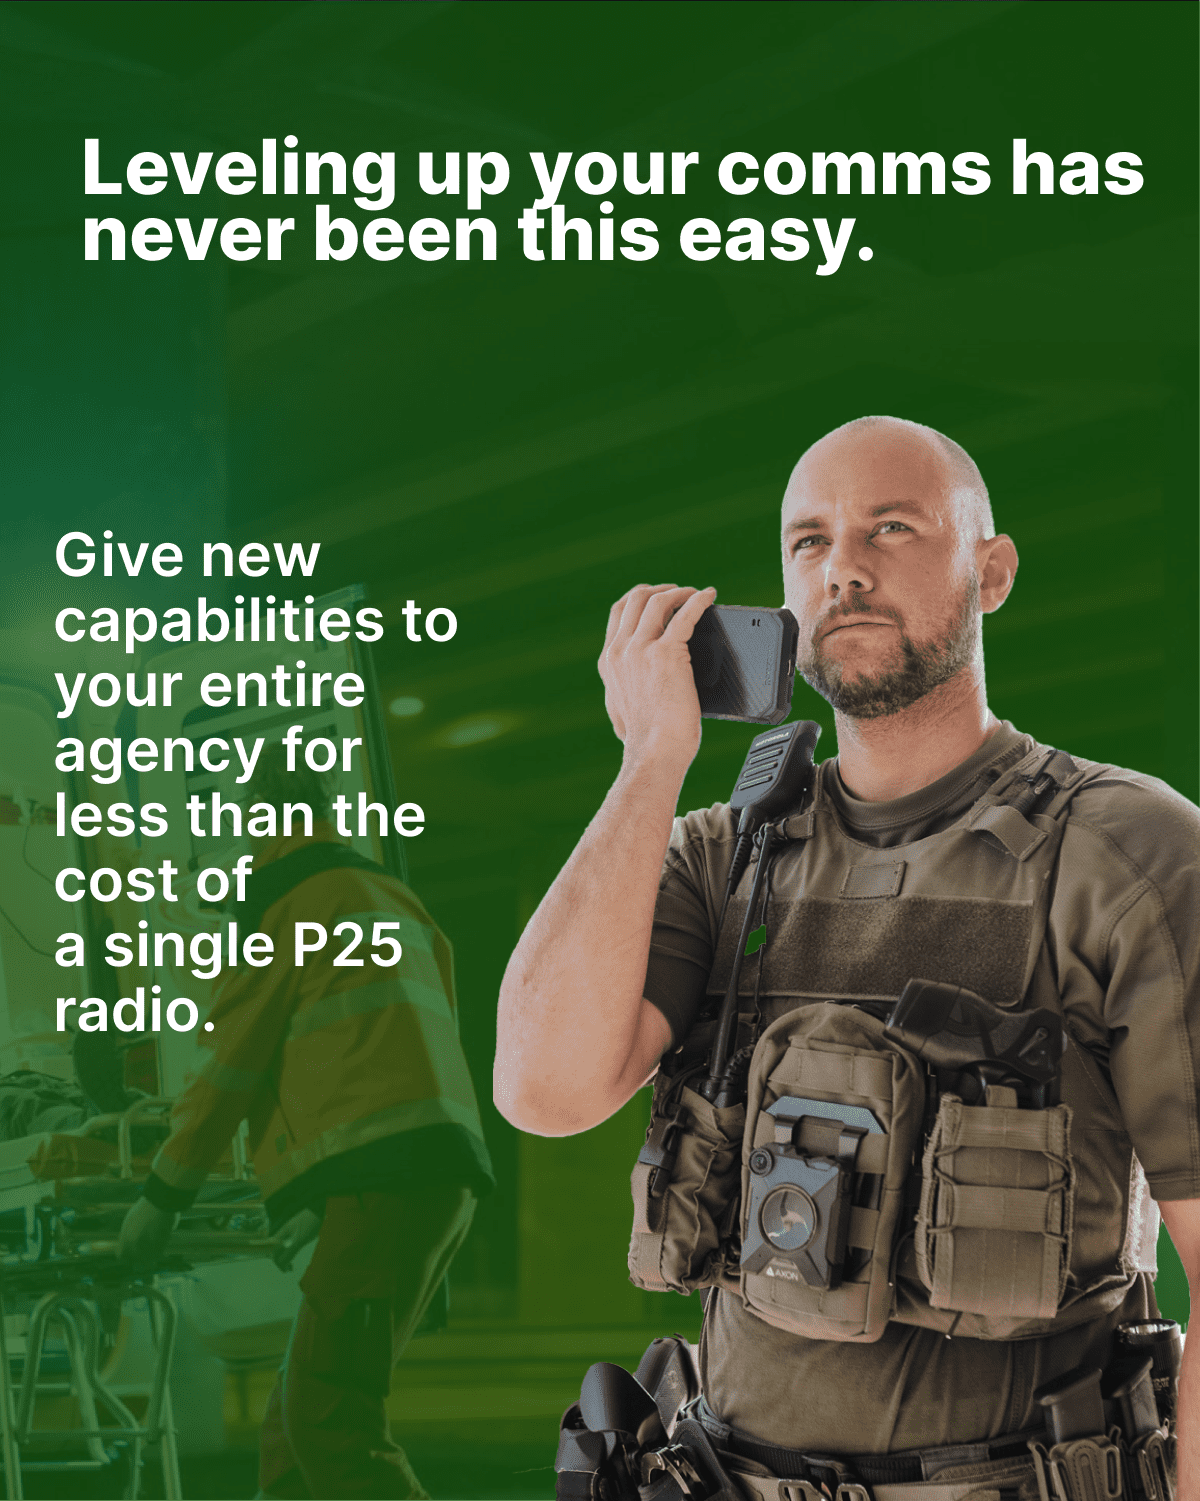 Level up your comms with Tango Tango